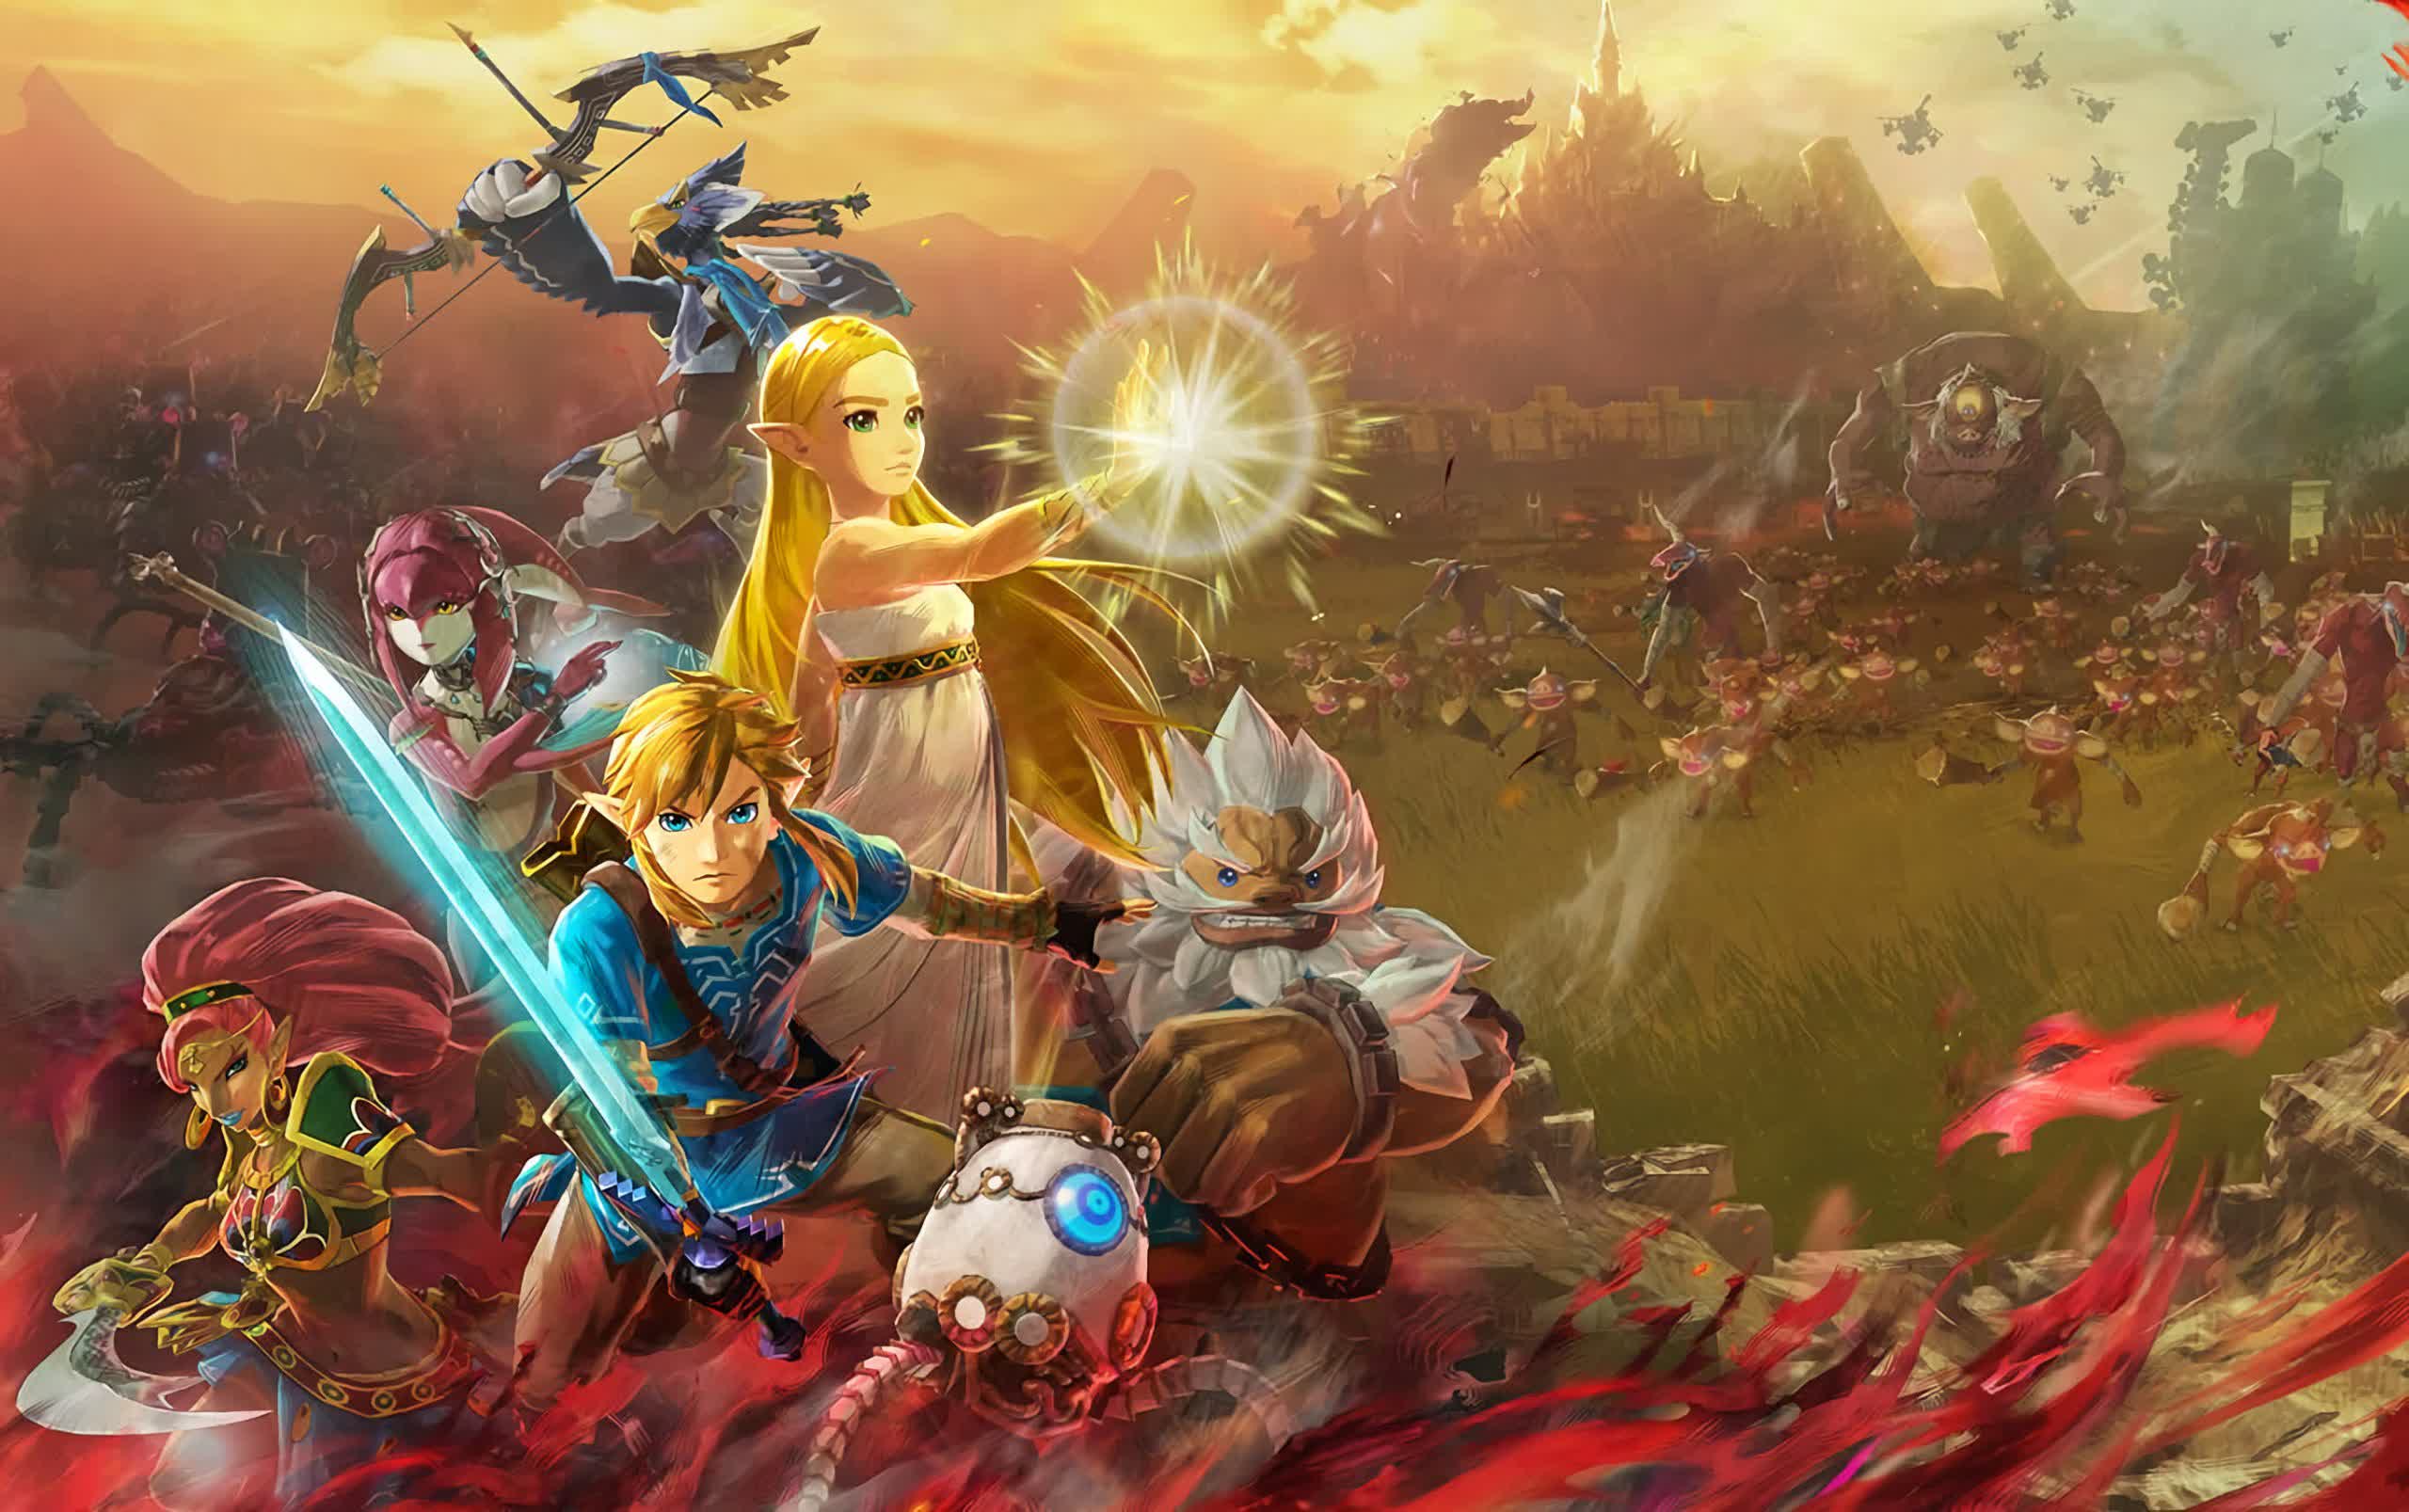 Nintendo surprise announcement pegs Hyrule Warriors: Age of Calamity for November release